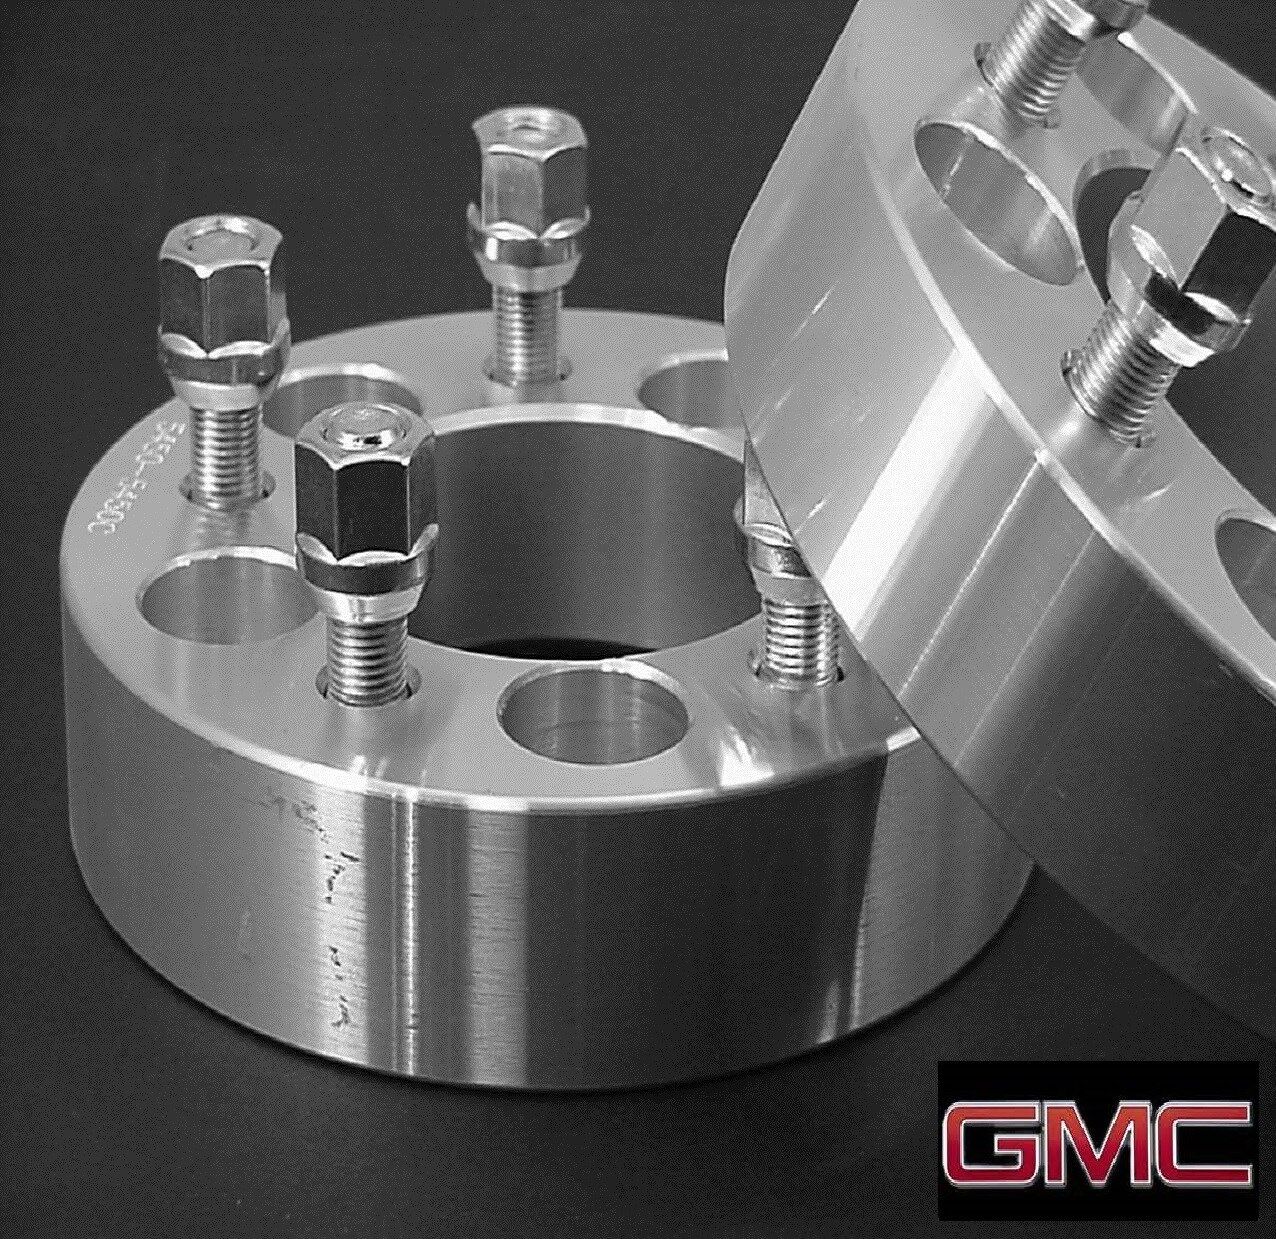 2 Pc GMC JIMMY 5x4.75 WHEEL ADAPTER SPACERS 2.00 Inch  # 5475E1215